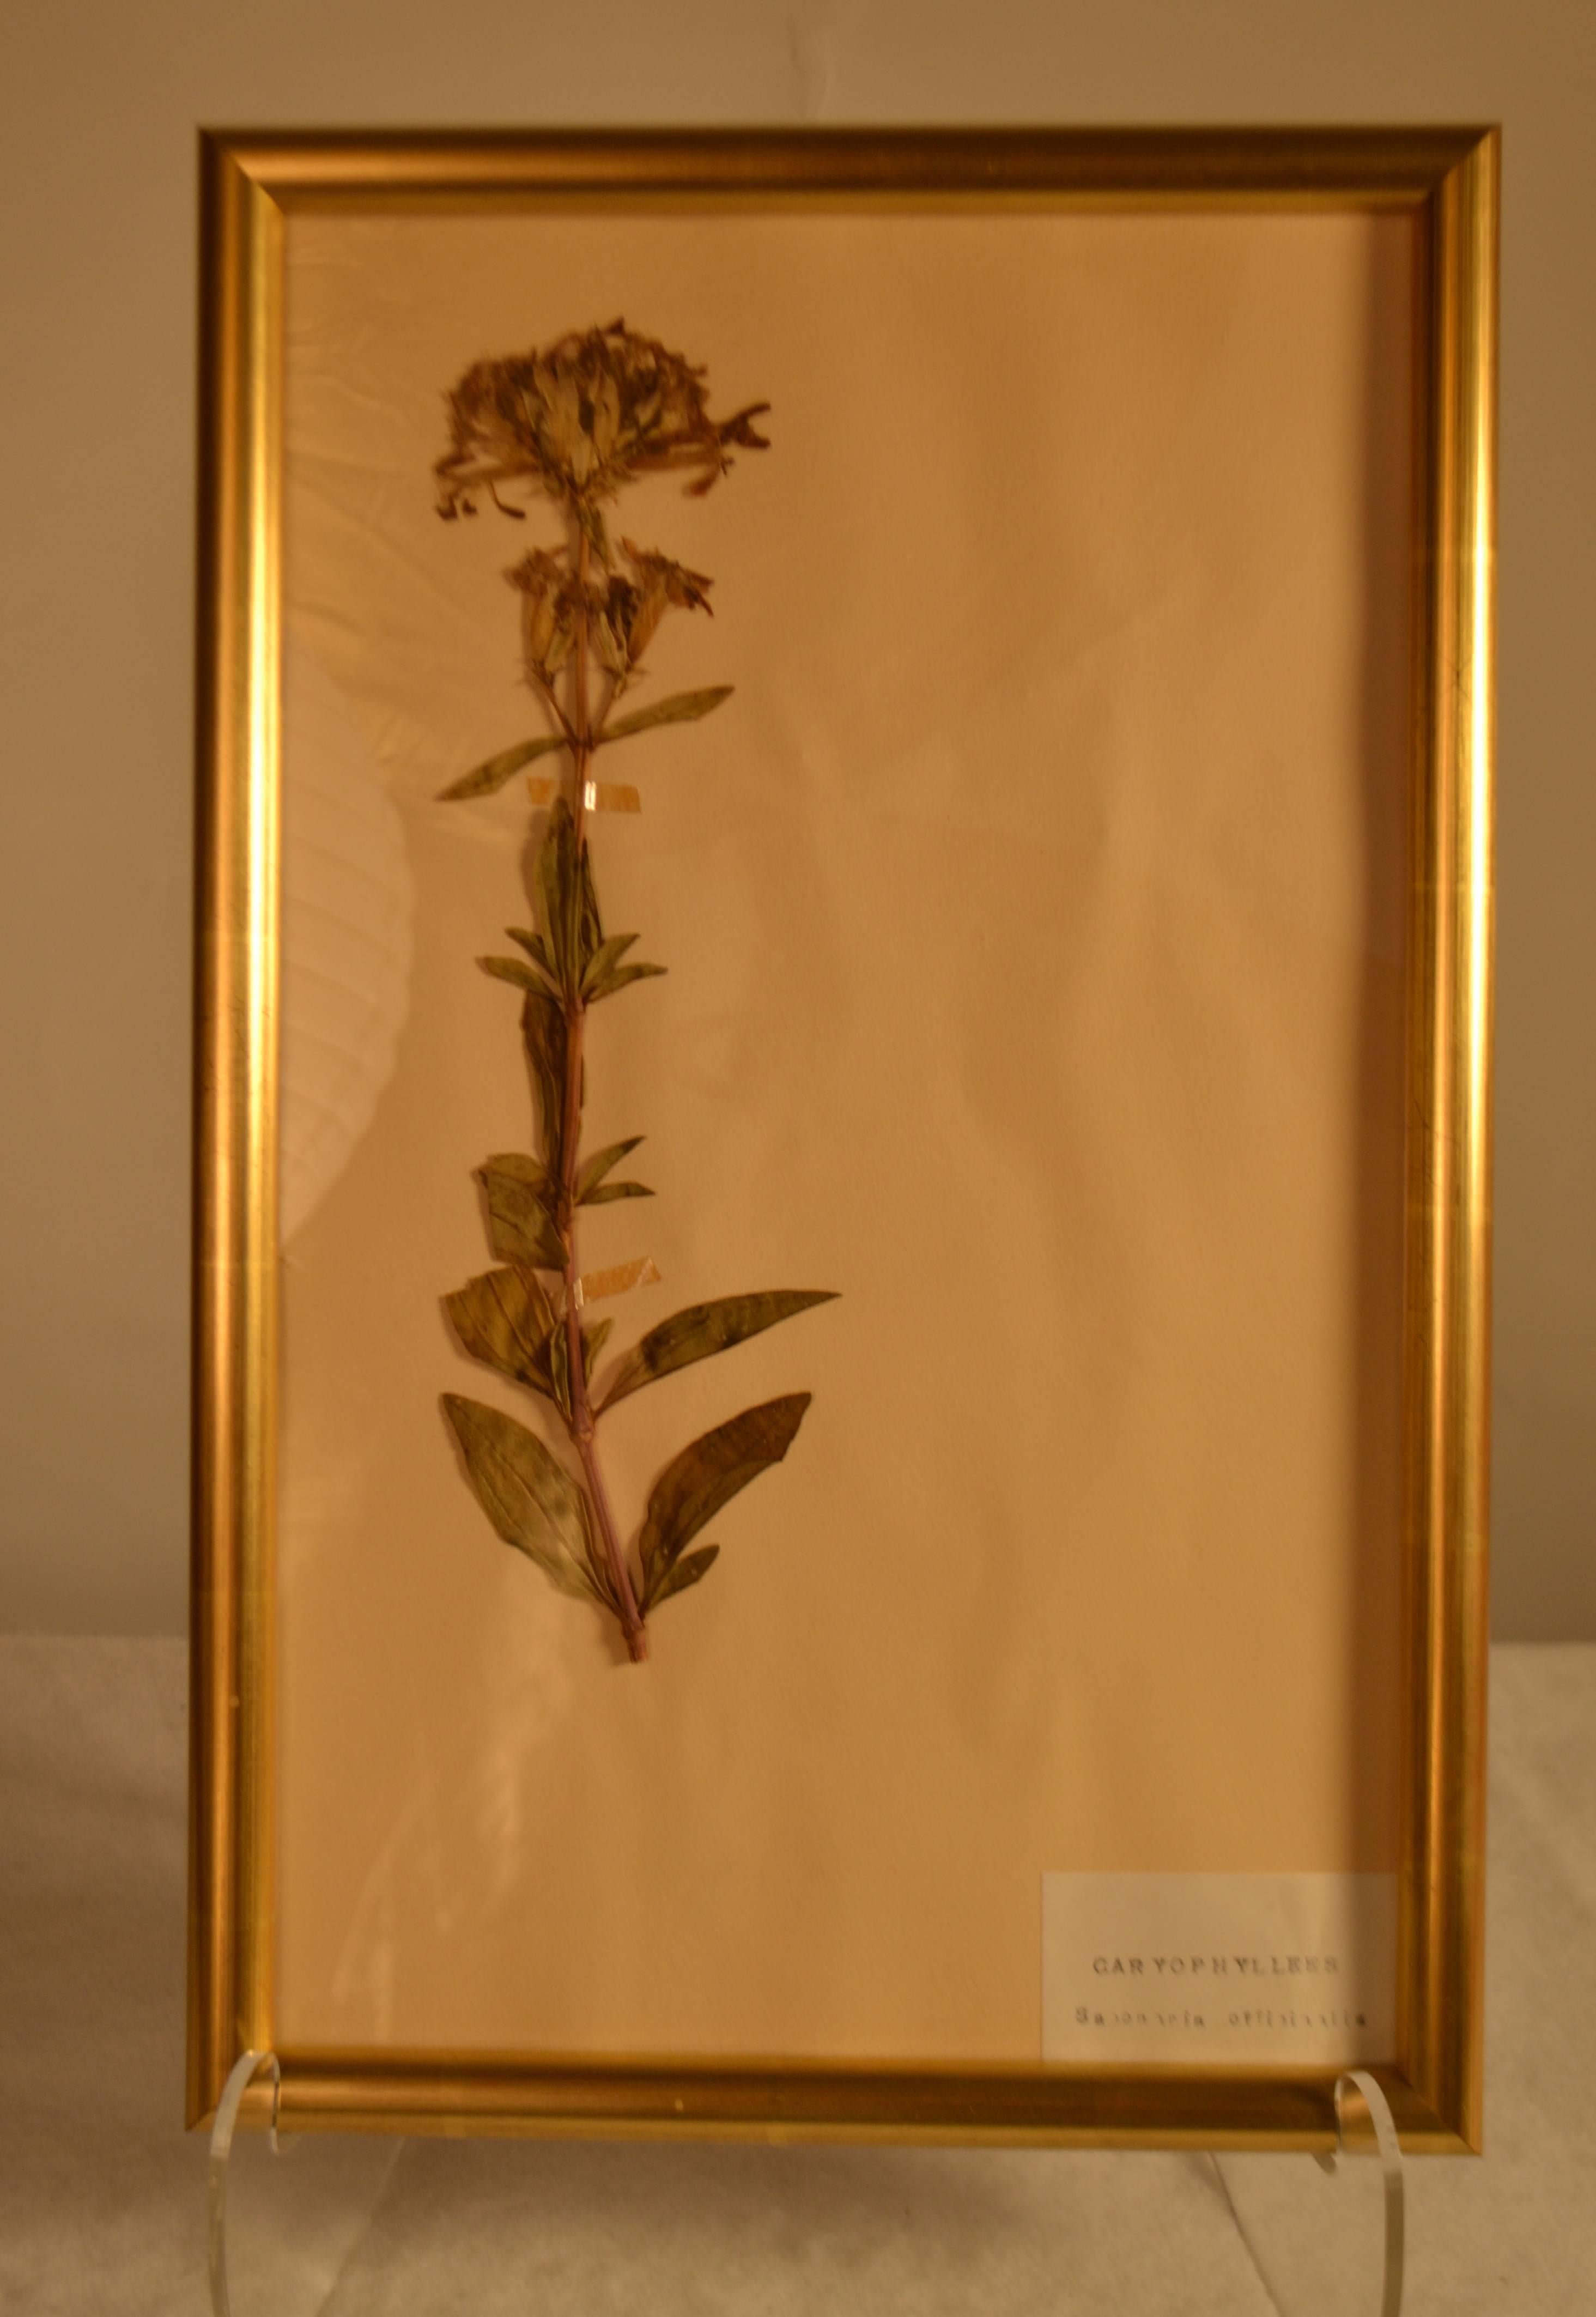 Framed Herbier in new gold leaf frame, circa 1920. A collection of 100 of these botanicals are available.